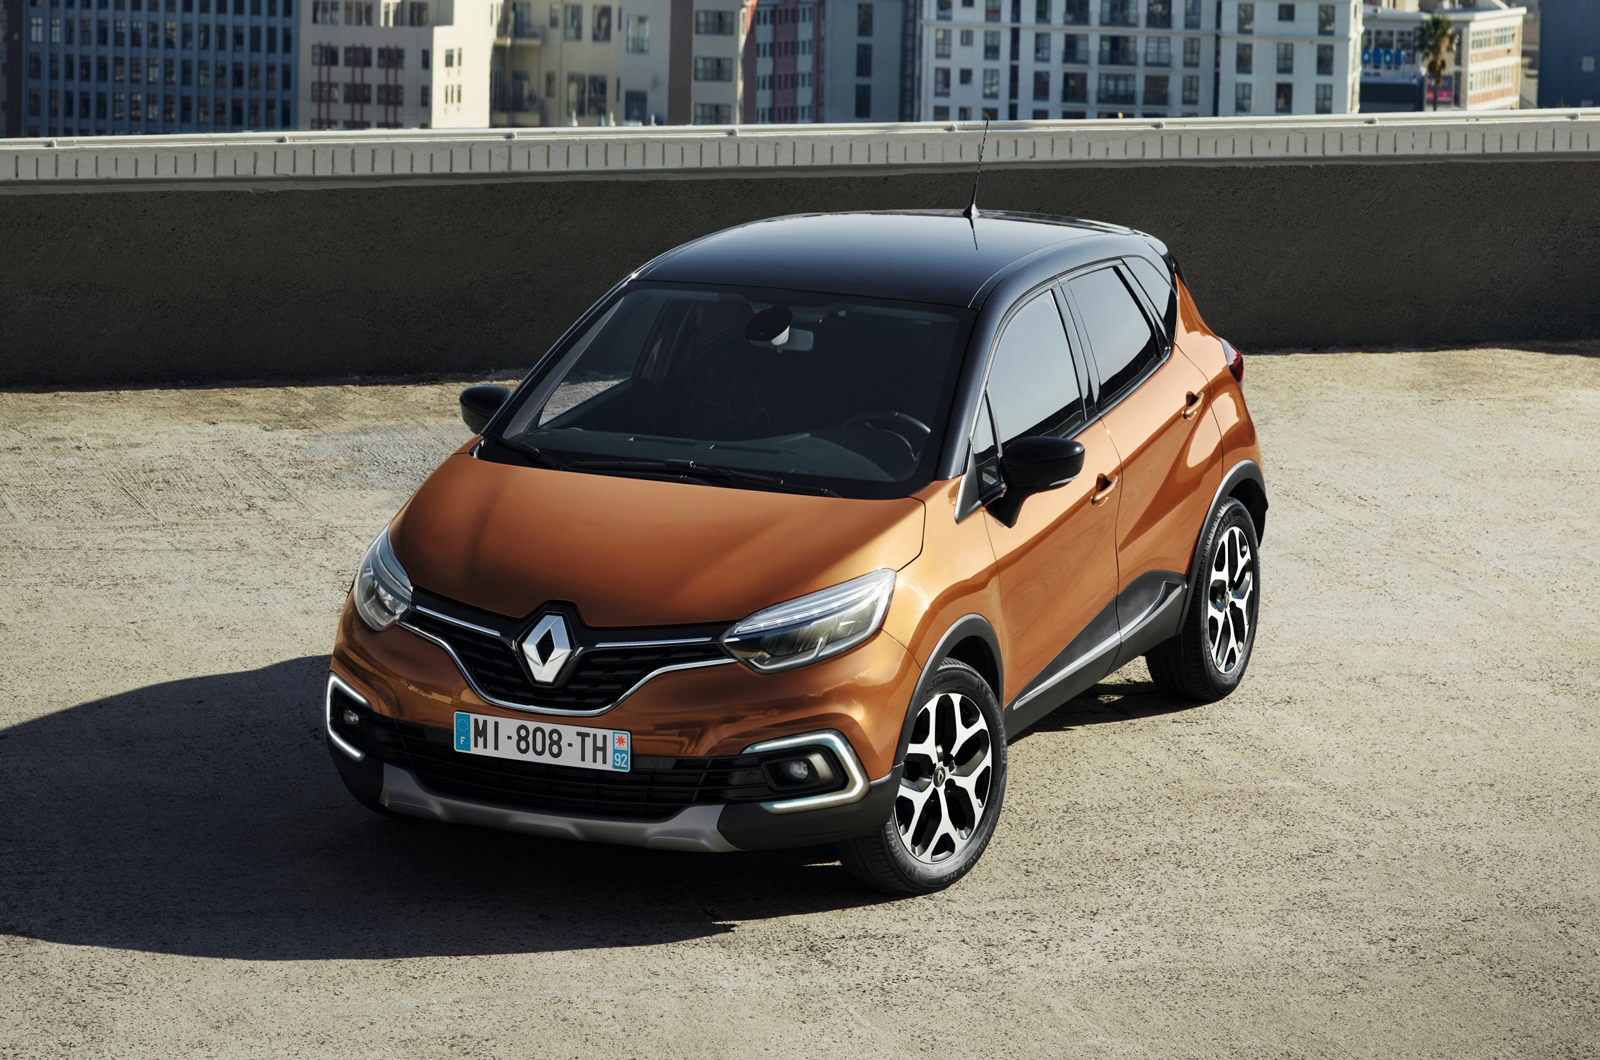 Facelifted Renault Captur launches with starting price of £15,355